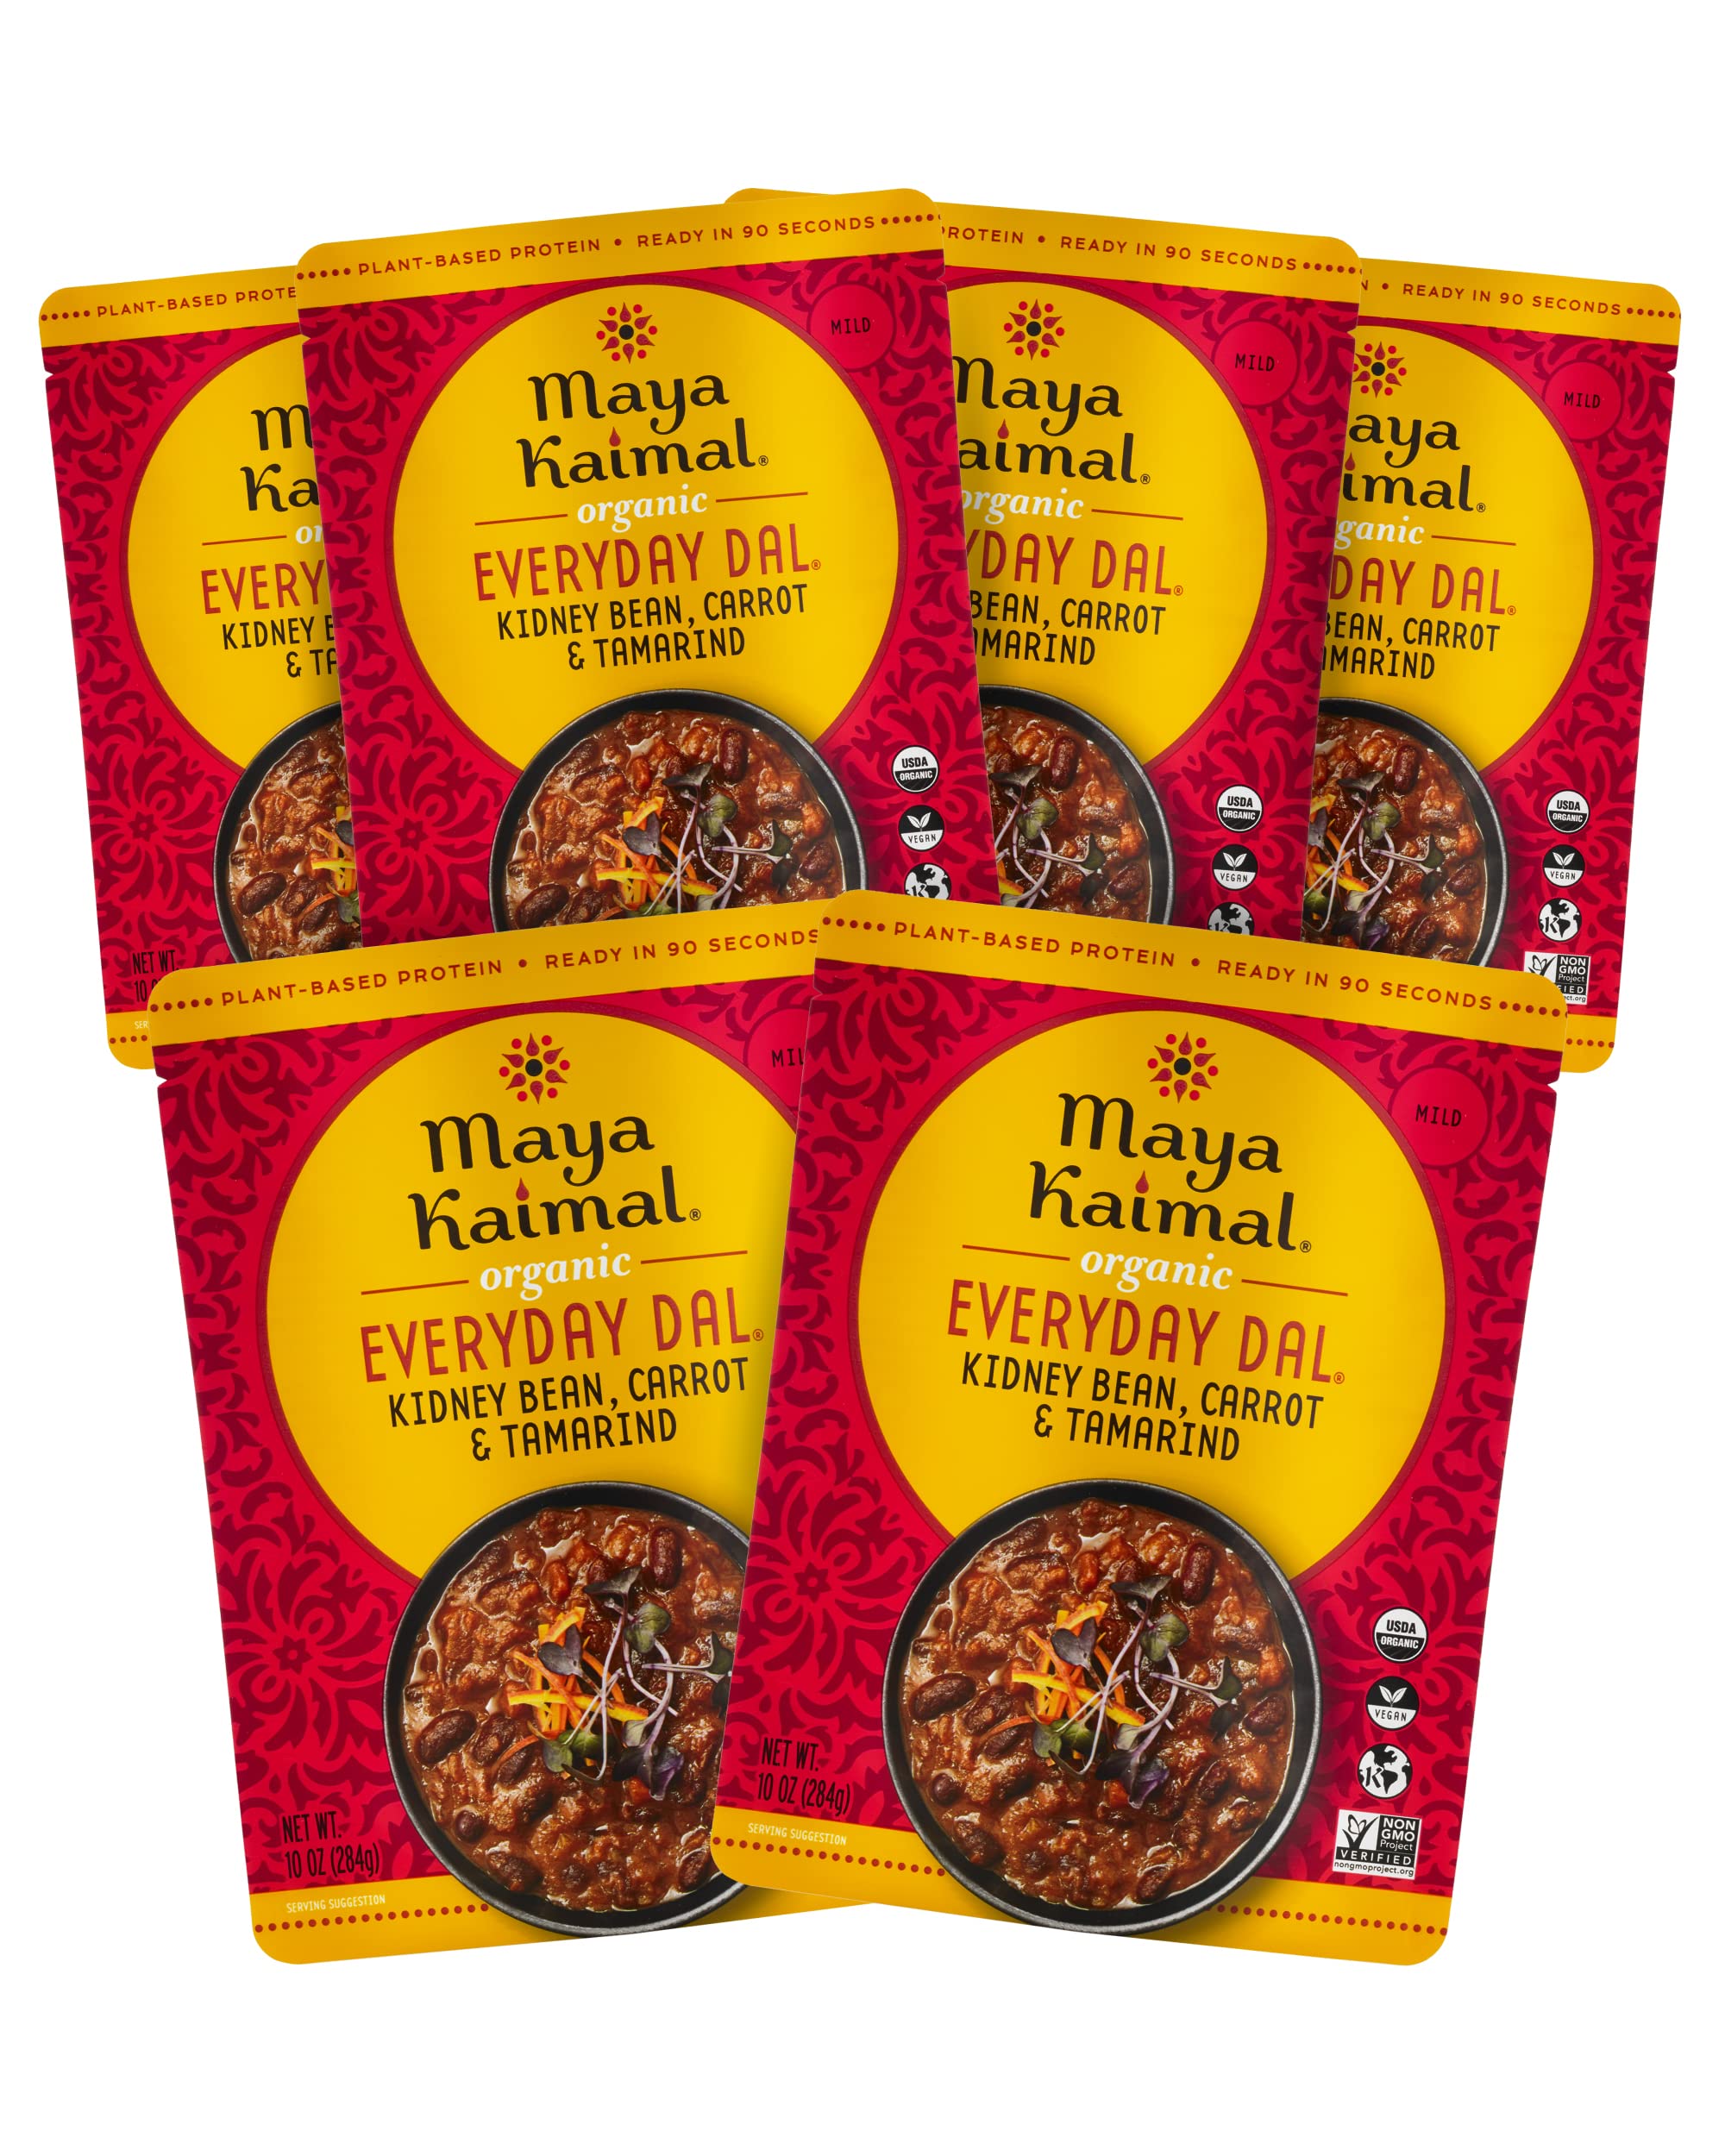 Maya Kaimal Foods - Organic Indian Everyday Dal - Kidney Bean 10oz - Fully Cooked with Carrots and Tamarind - Vegan - Microwavable - Ready to Eat -...